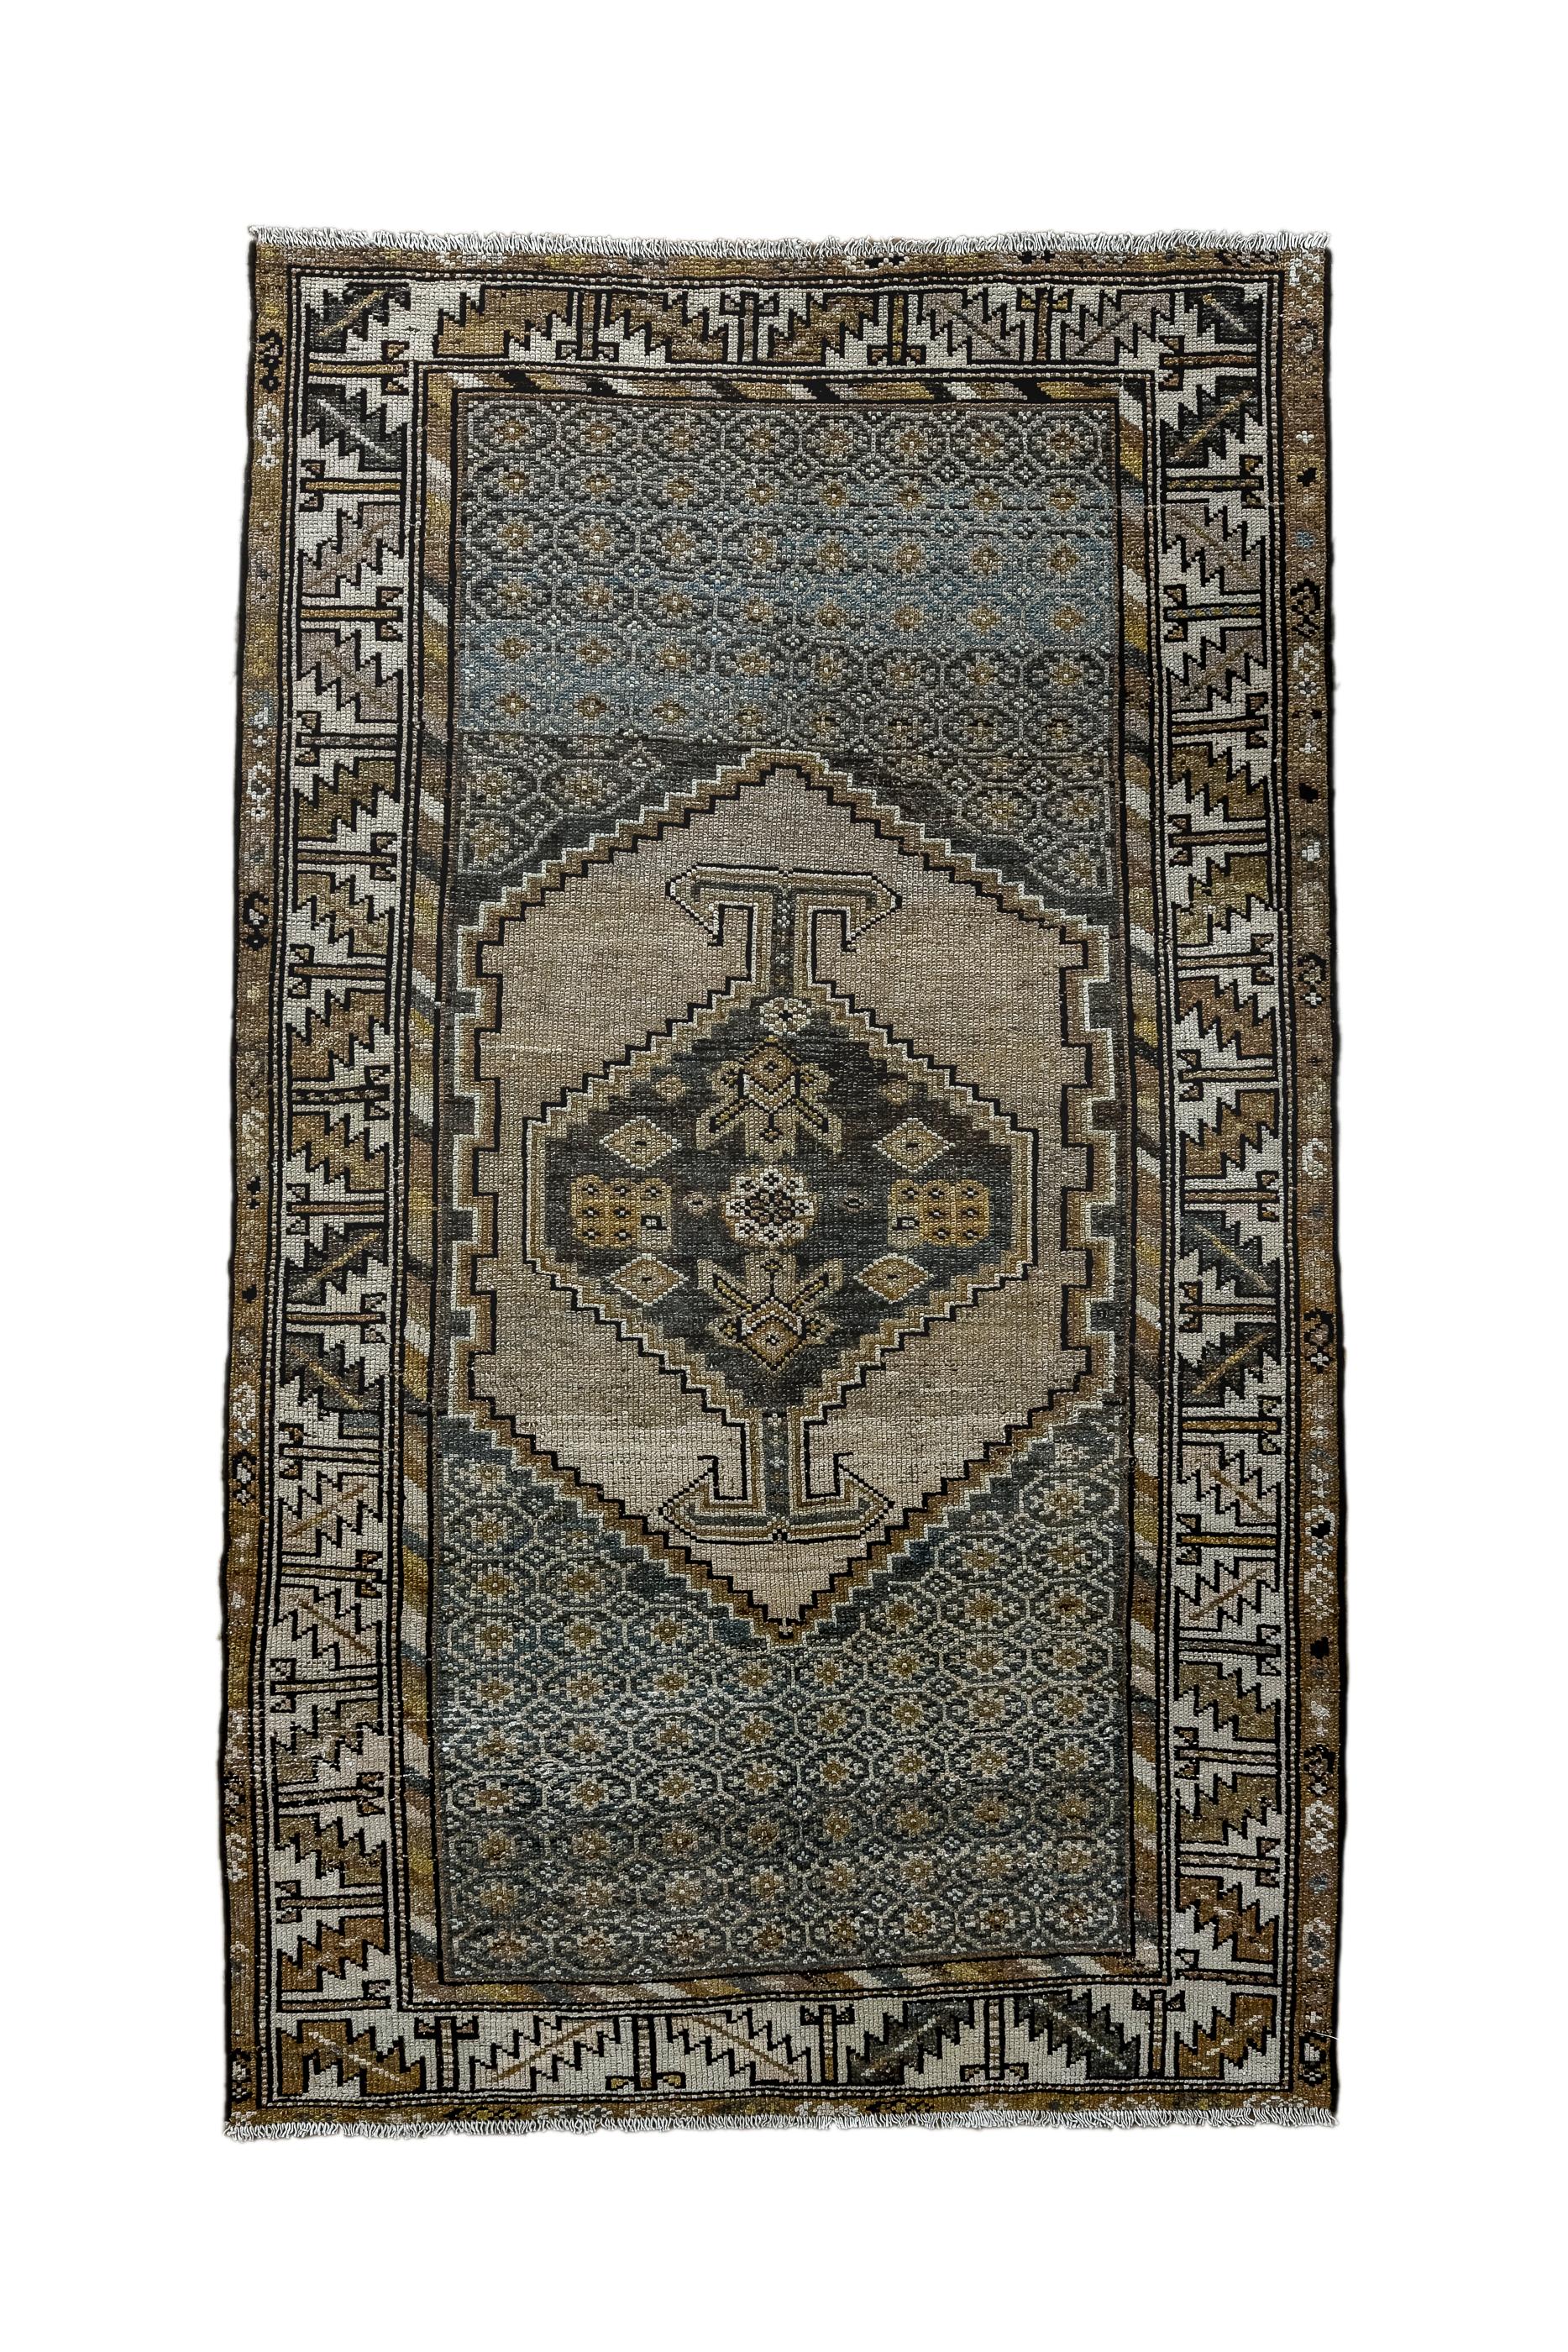 The small, abrashed camel-beige stepped and notched sub-field encloses a relatively conforming hexagonal, medallion with bold anchor pendants. The slate field shows a small lattice of flattened octagons. Caucasian-style ecru border with slanted